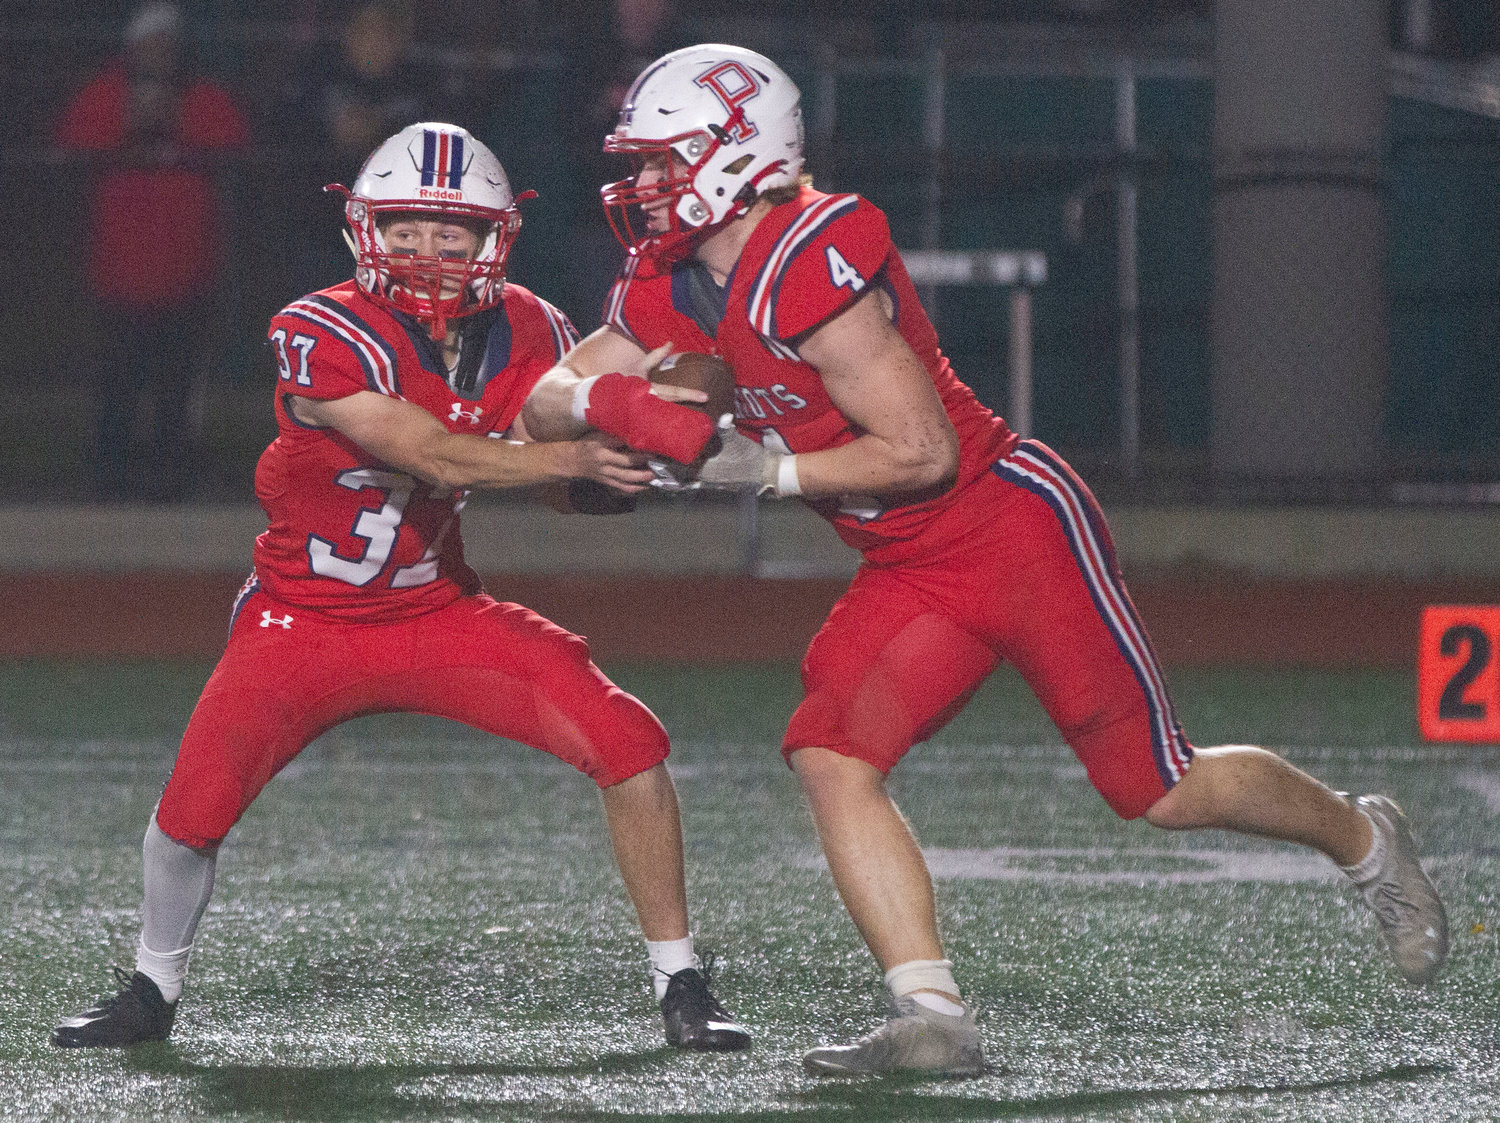 Portsmouth quarterback Adam Conheeny hands off to senior running back Neal Tullson in the first quarter to start a must-needed drive against East Providence during Friday’s Division II quarterfinal game.